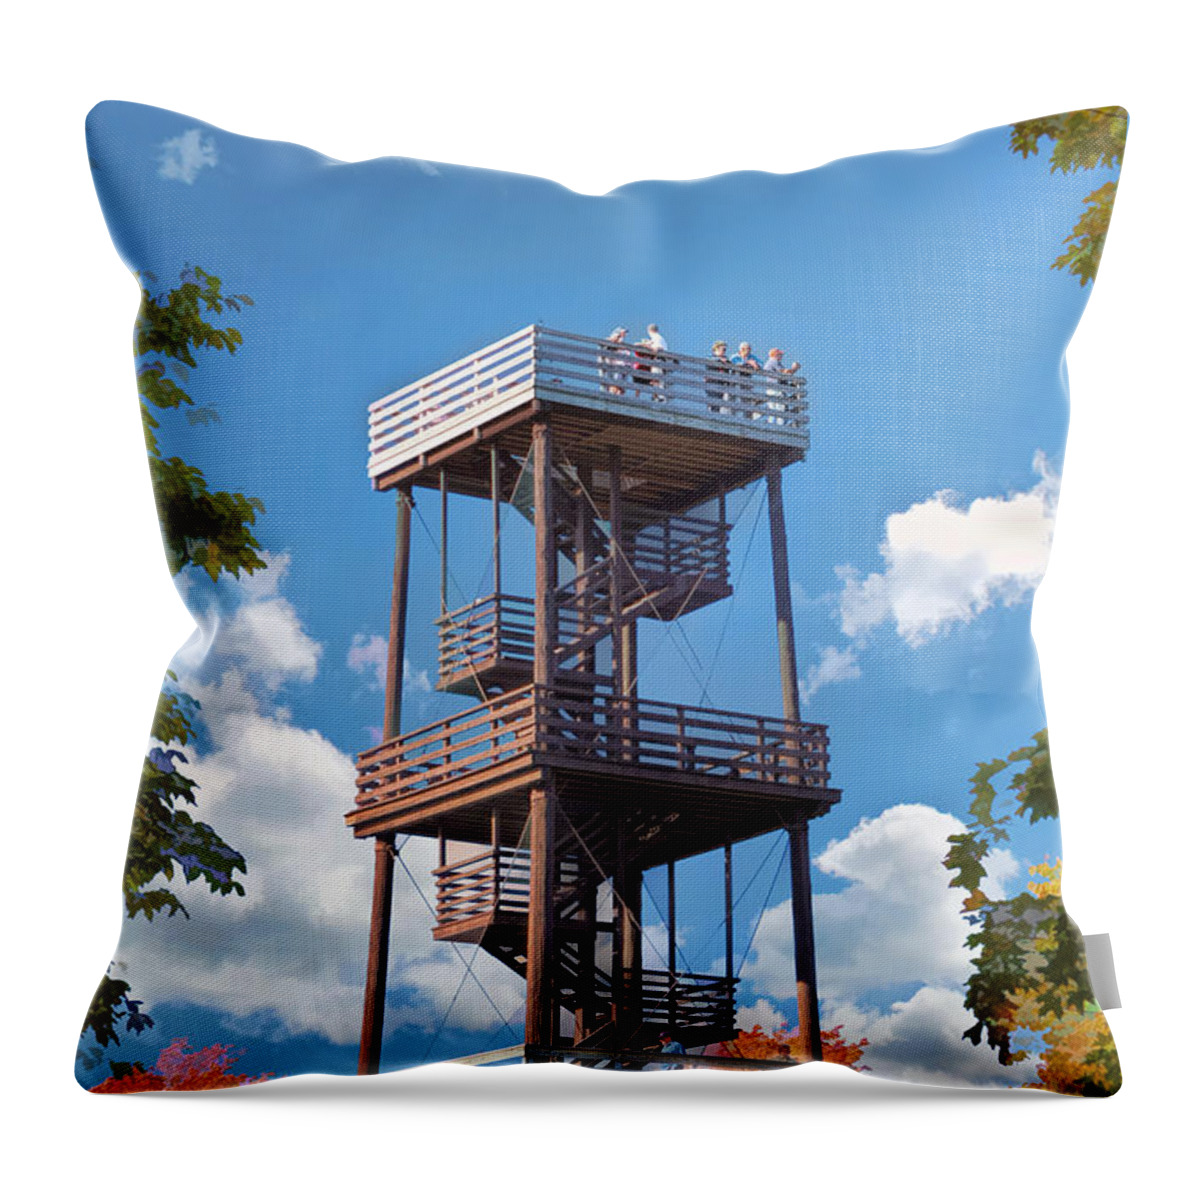 Door County Throw Pillow featuring the painting Door County Eagle Tower Peninsula State Park by Christopher Arndt